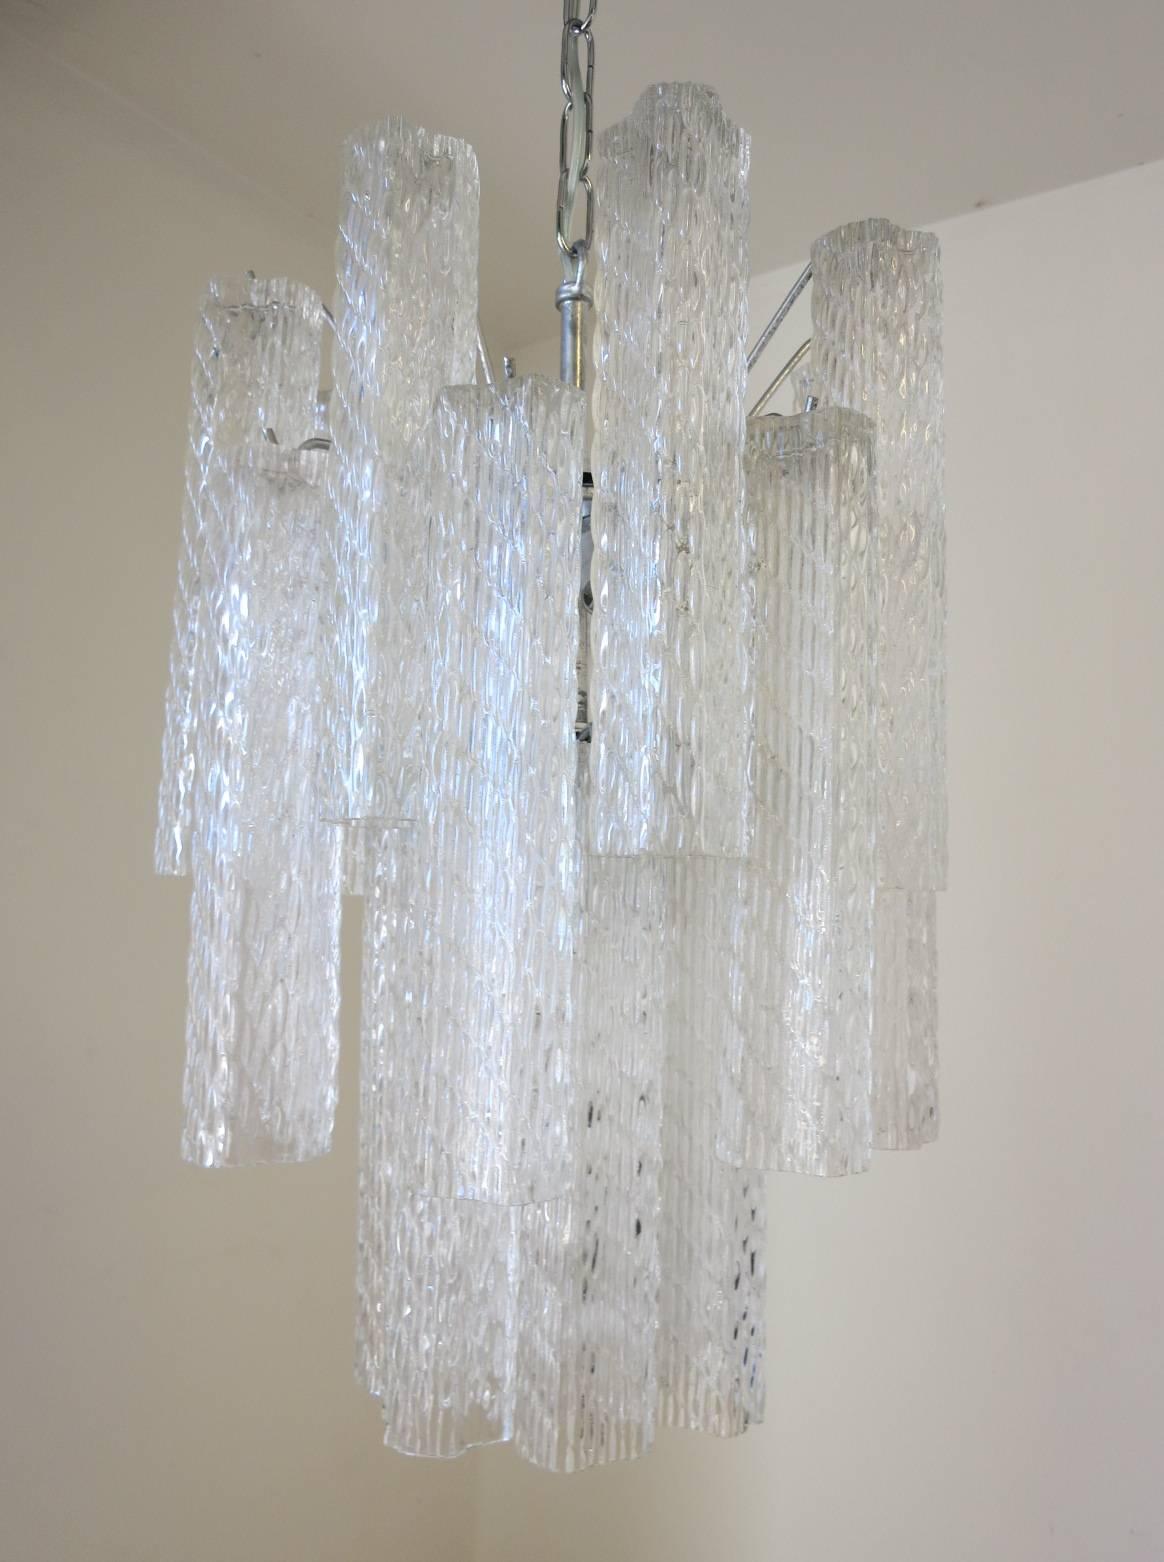 Original vintage Italian chandelier with clear Murano textured tubes on chrome frame by Venini,
 4 lights / max 40W each
Diameter: 13 inches / Height: 20 inches
1 in stock in Palm Springs
Order Reference #: C91
LU175325516263